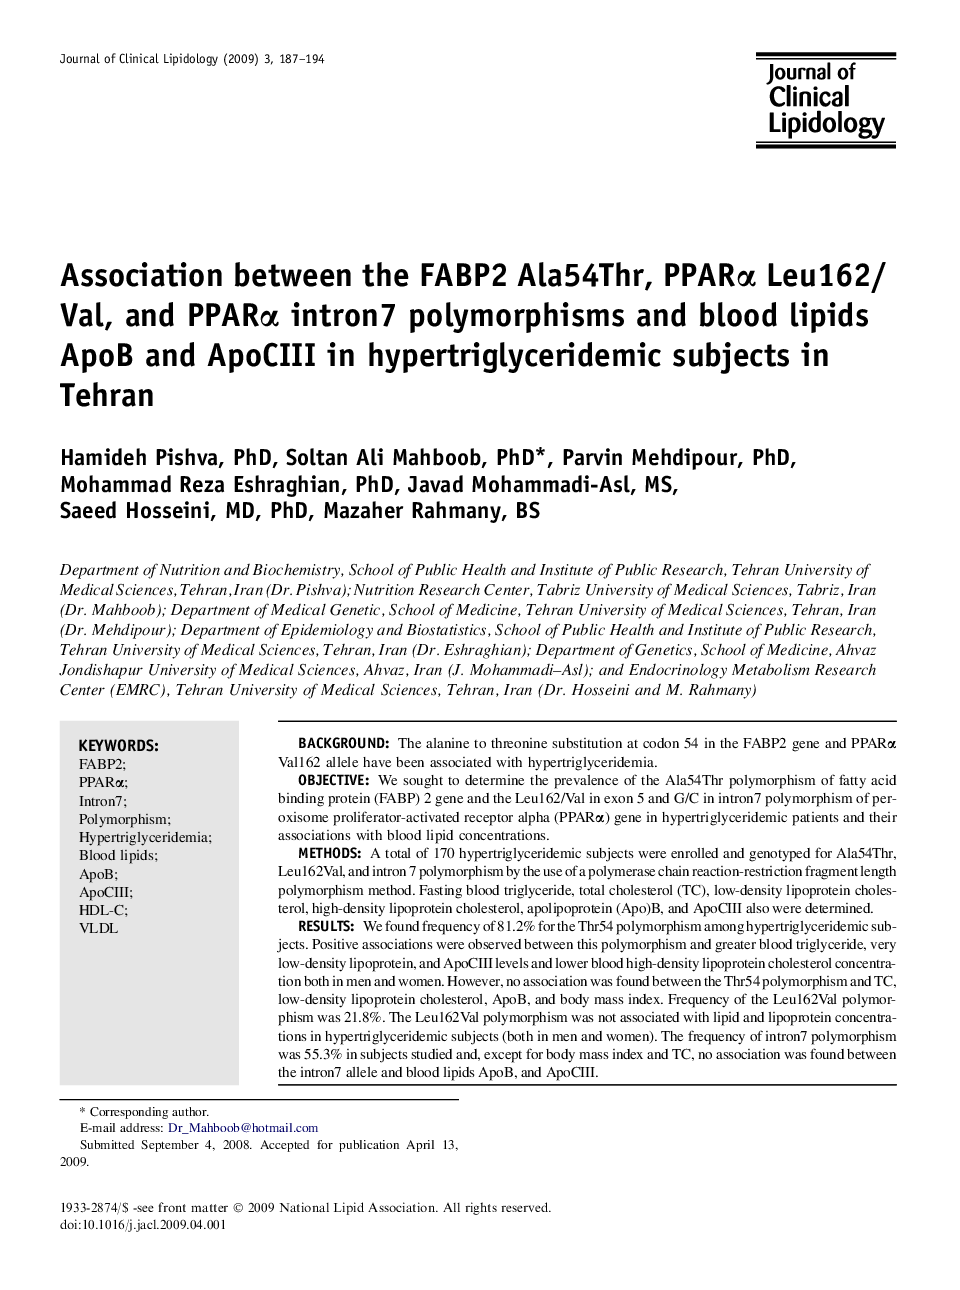 Association between the FABP2 Ala54Thr, PPARα Leu162/Val, and PPARα intron7 polymorphisms and blood lipids ApoB and ApoCIII in hypertriglyceridemic subjects in Tehran